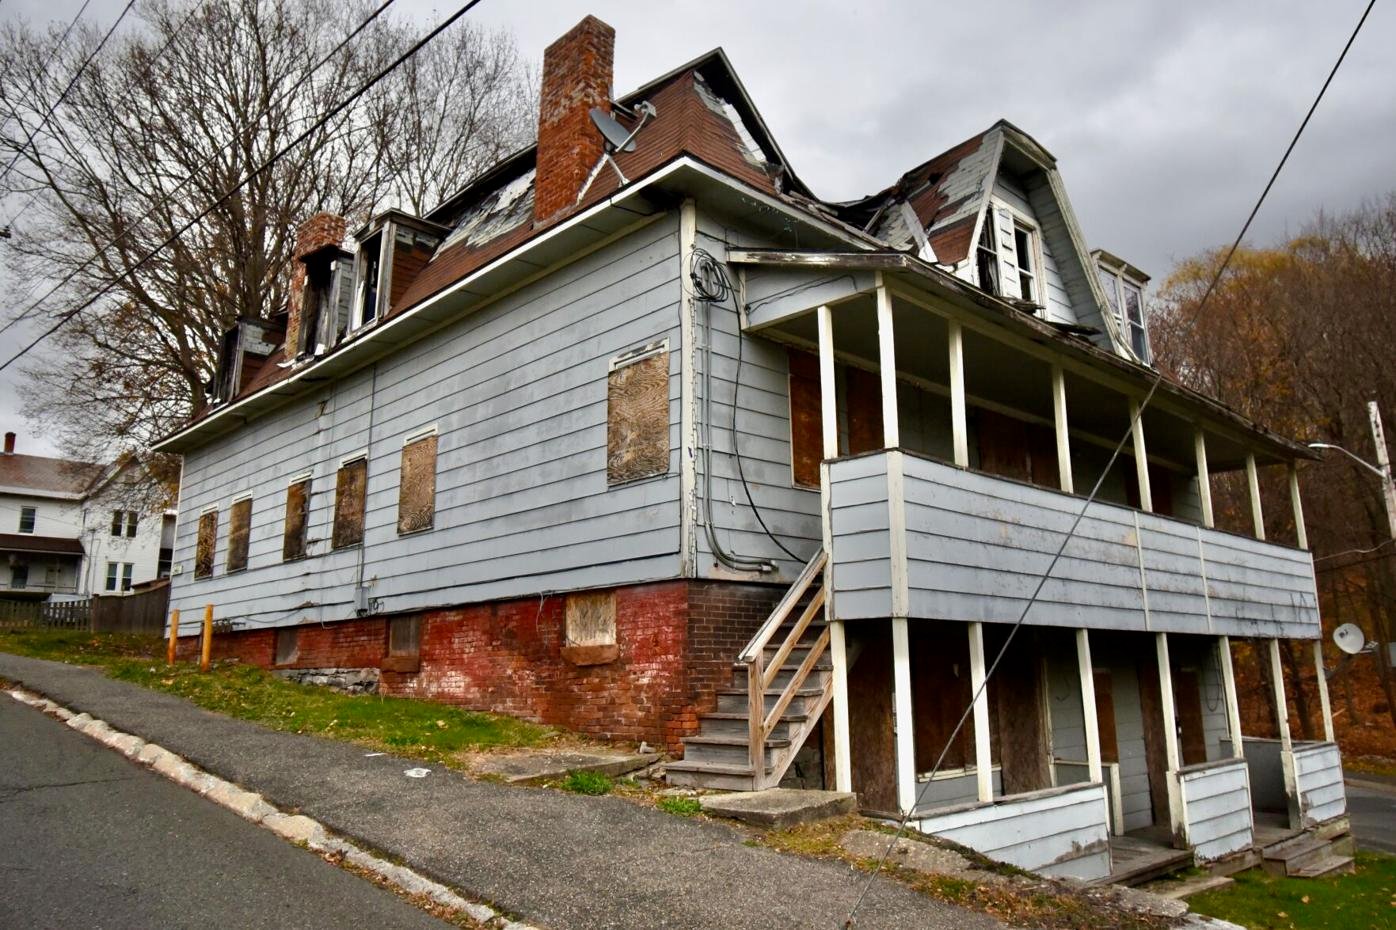 Louison House planning to open housing in North Adams for homeless youth, Northern Berkshires